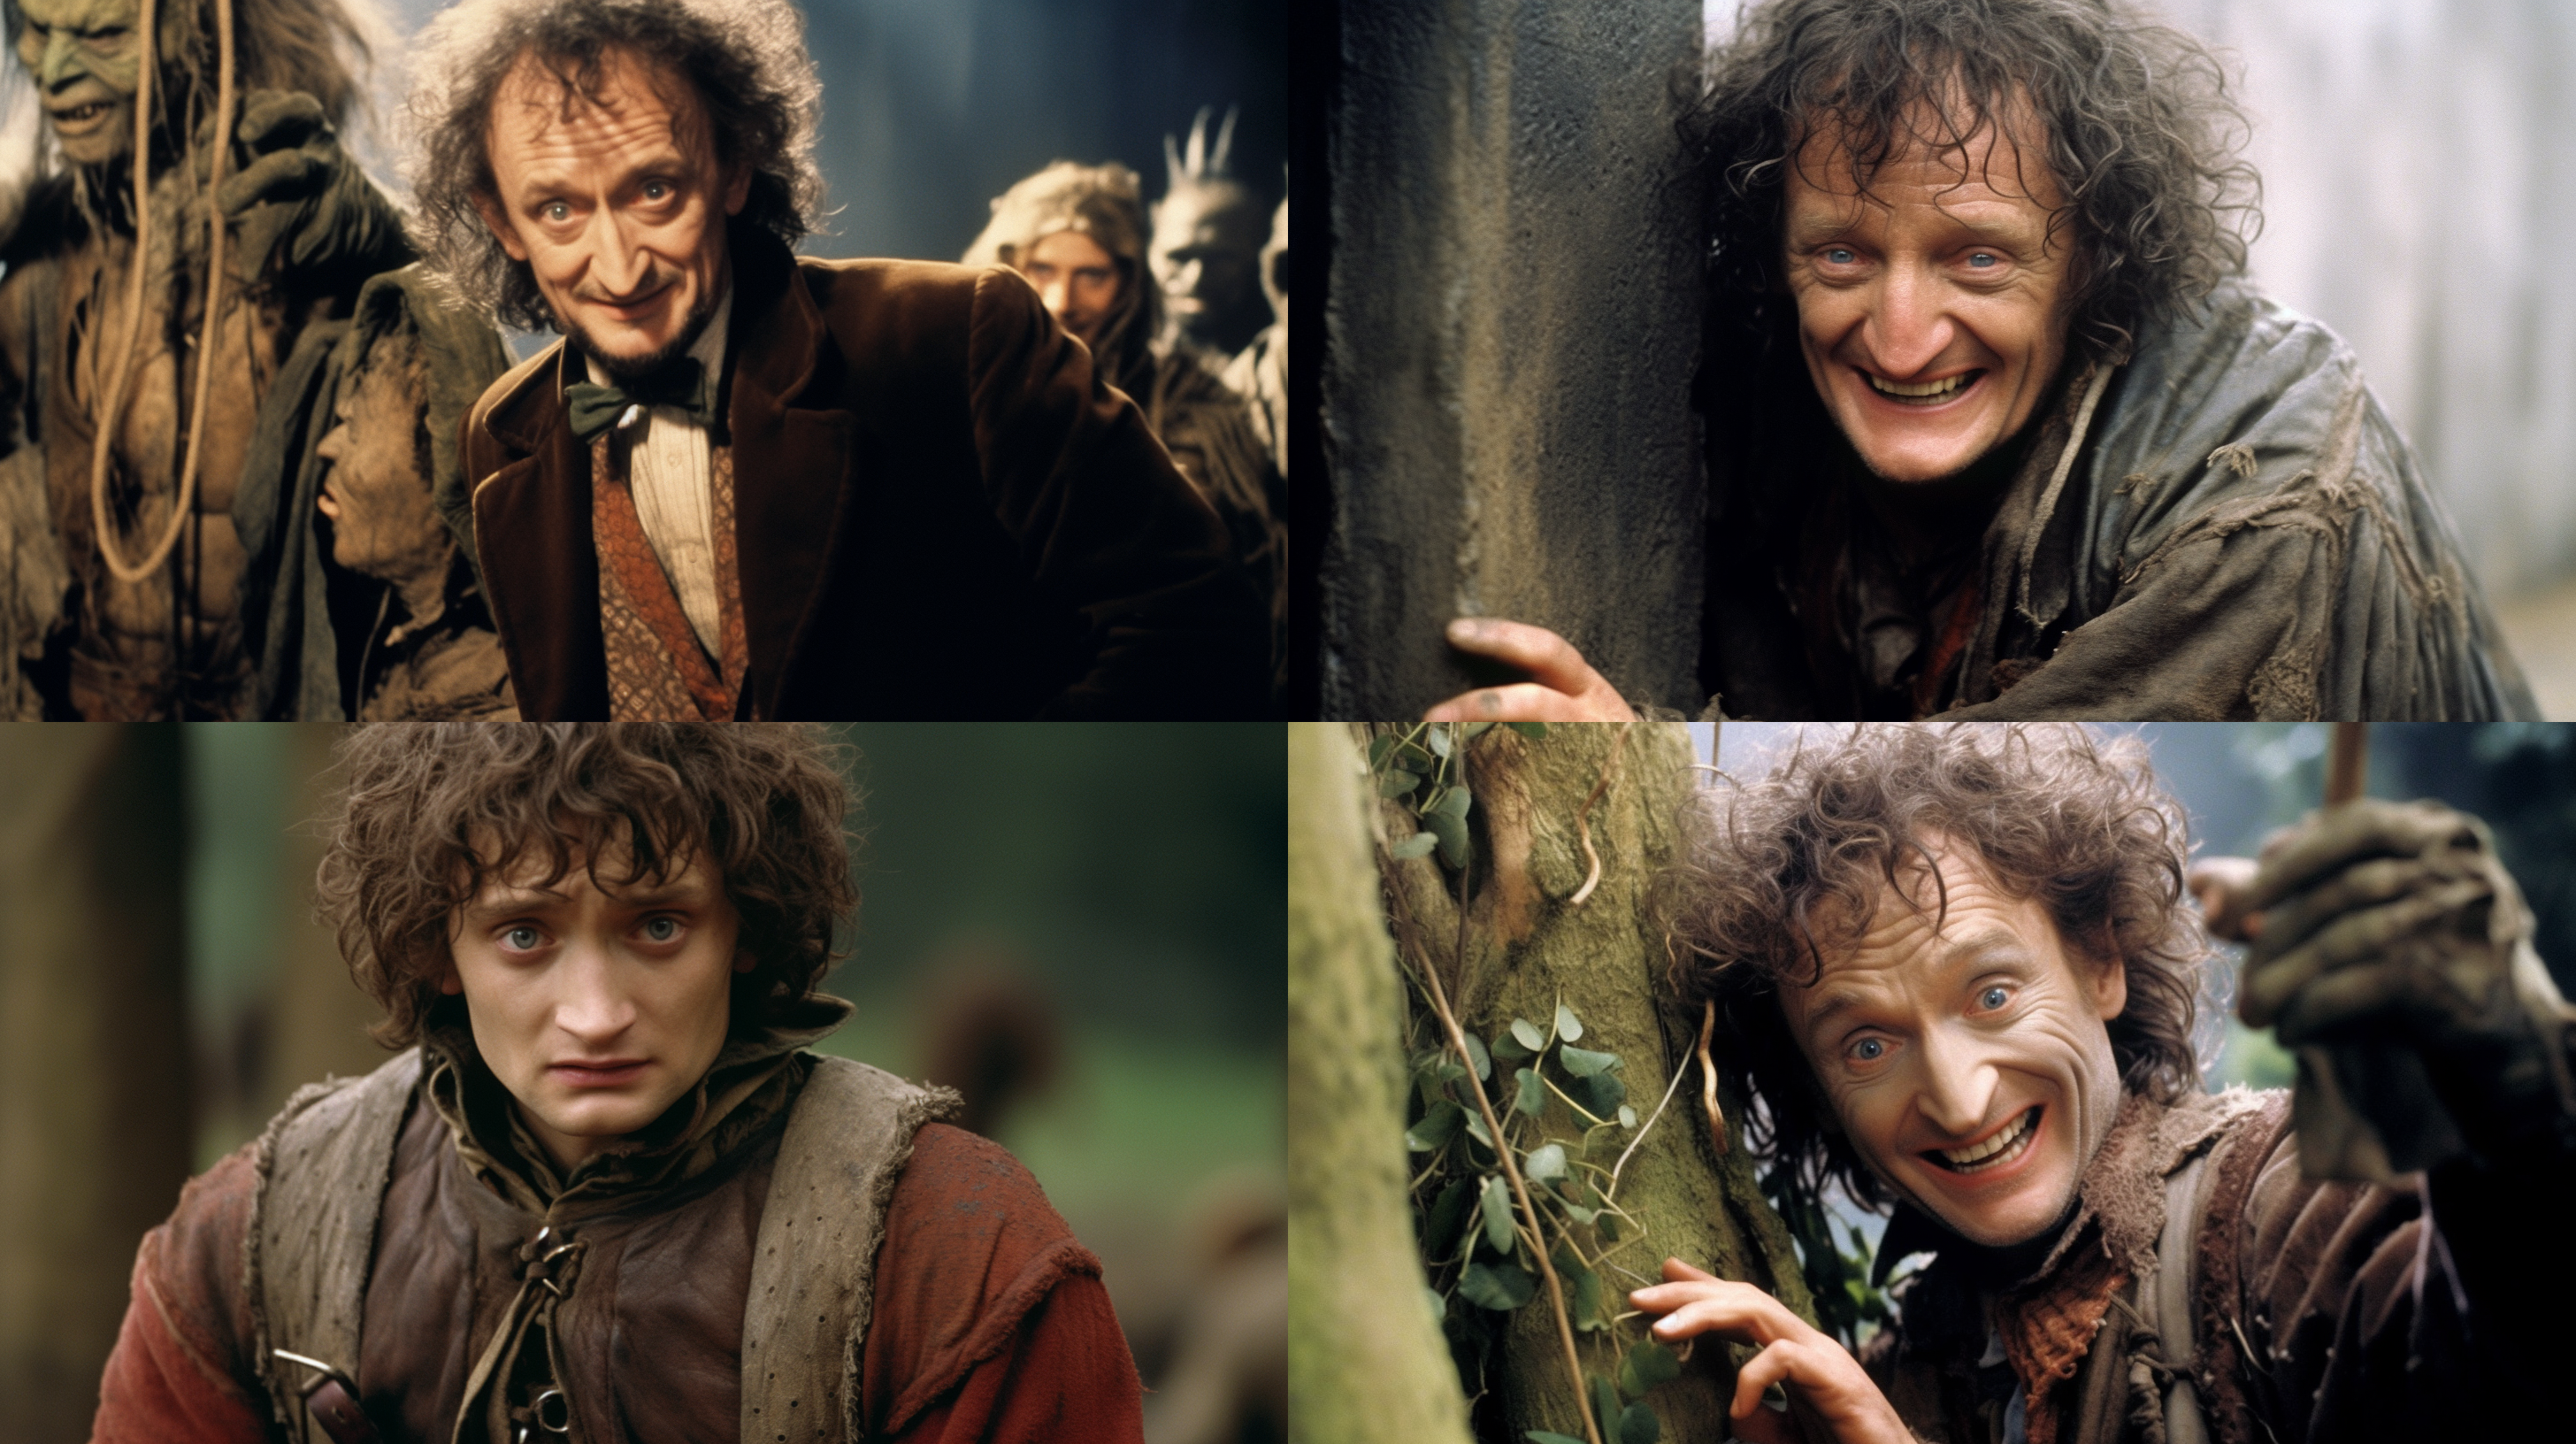 fernando172543 Robert Englund dressed up as Frodo Baggings in a 753e780f 5f59 455f a71d 44a92947297c